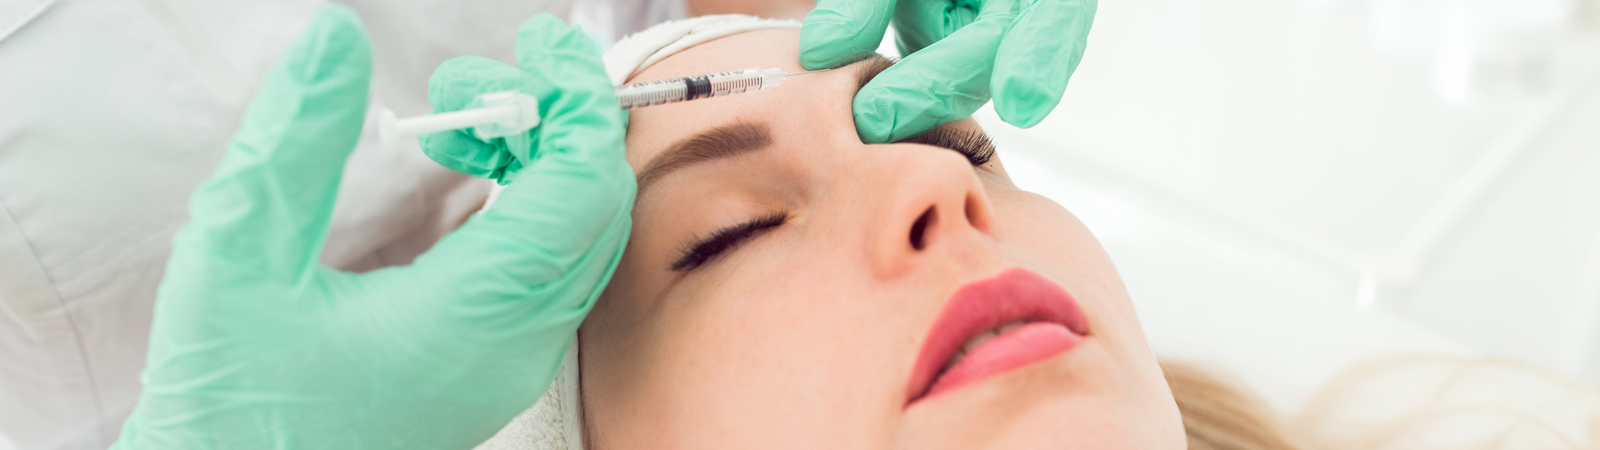 5 Long-Term Effects of Botox You Need to Know